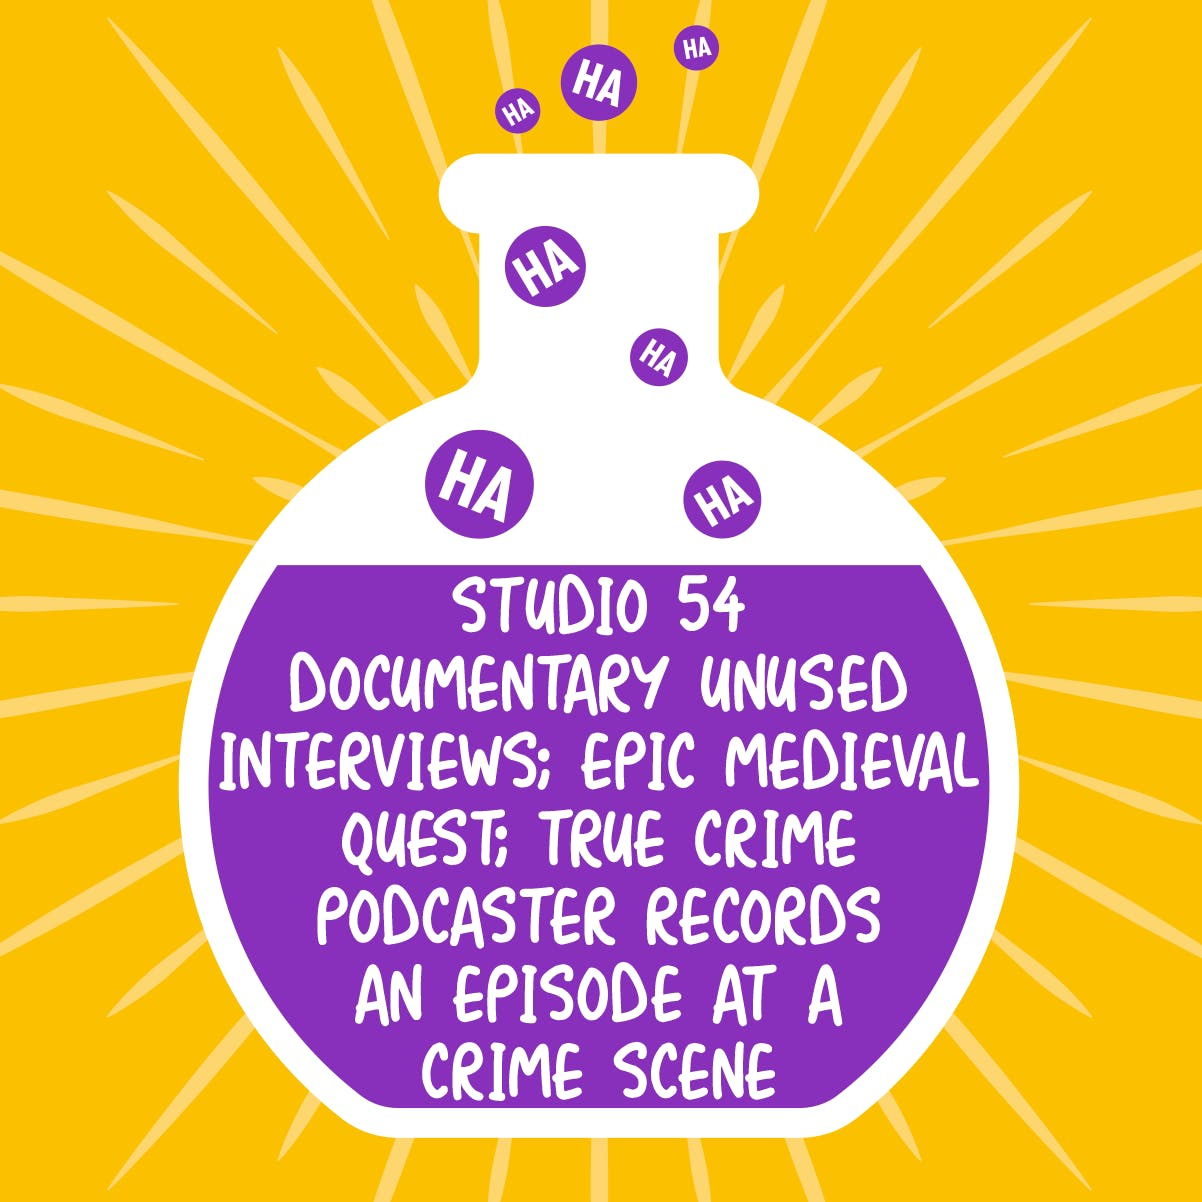 Studio 54 Documentary Unused Interviews; Epic Medieval Quest; True Crime Podcaster Records an Episode at a Crime Scene